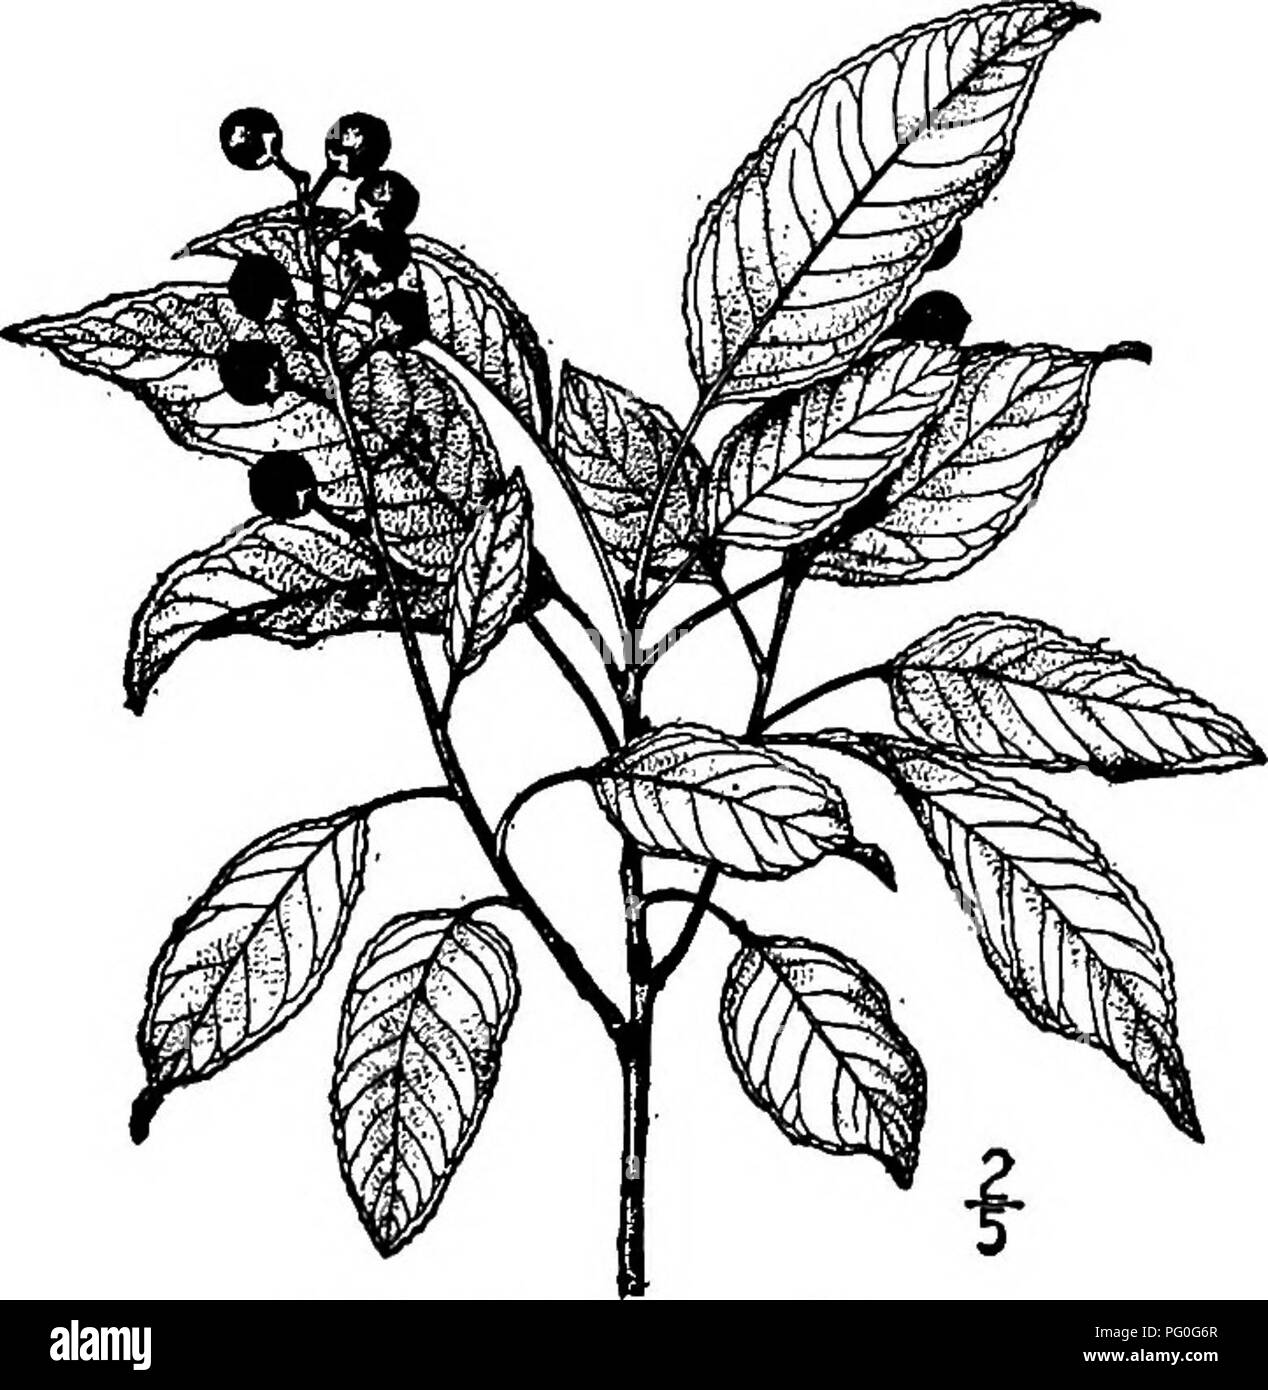 . North American trees : being descriptions and illustrations of the trees growing independently of cultivation in North America, north of Mexico and the West Indies . Trees. Fig. 465. — Columbian Wild Cherry. 4. TEXAS CHERRY —Padus eximia Small Prunus eximia Small A beautiful tree occurring in the river valleys of southern Texas, where it reaches a maximum height of 26 meters. The branches are loosely spreading, forming a round-headed tree; the twigs are slender, smooth, red-brown to gray- brown. The leaves are rather thin, ovate to oblong, lanceolate or oval, 3 to 8 cm. long, blunt or somewh Stock Photo